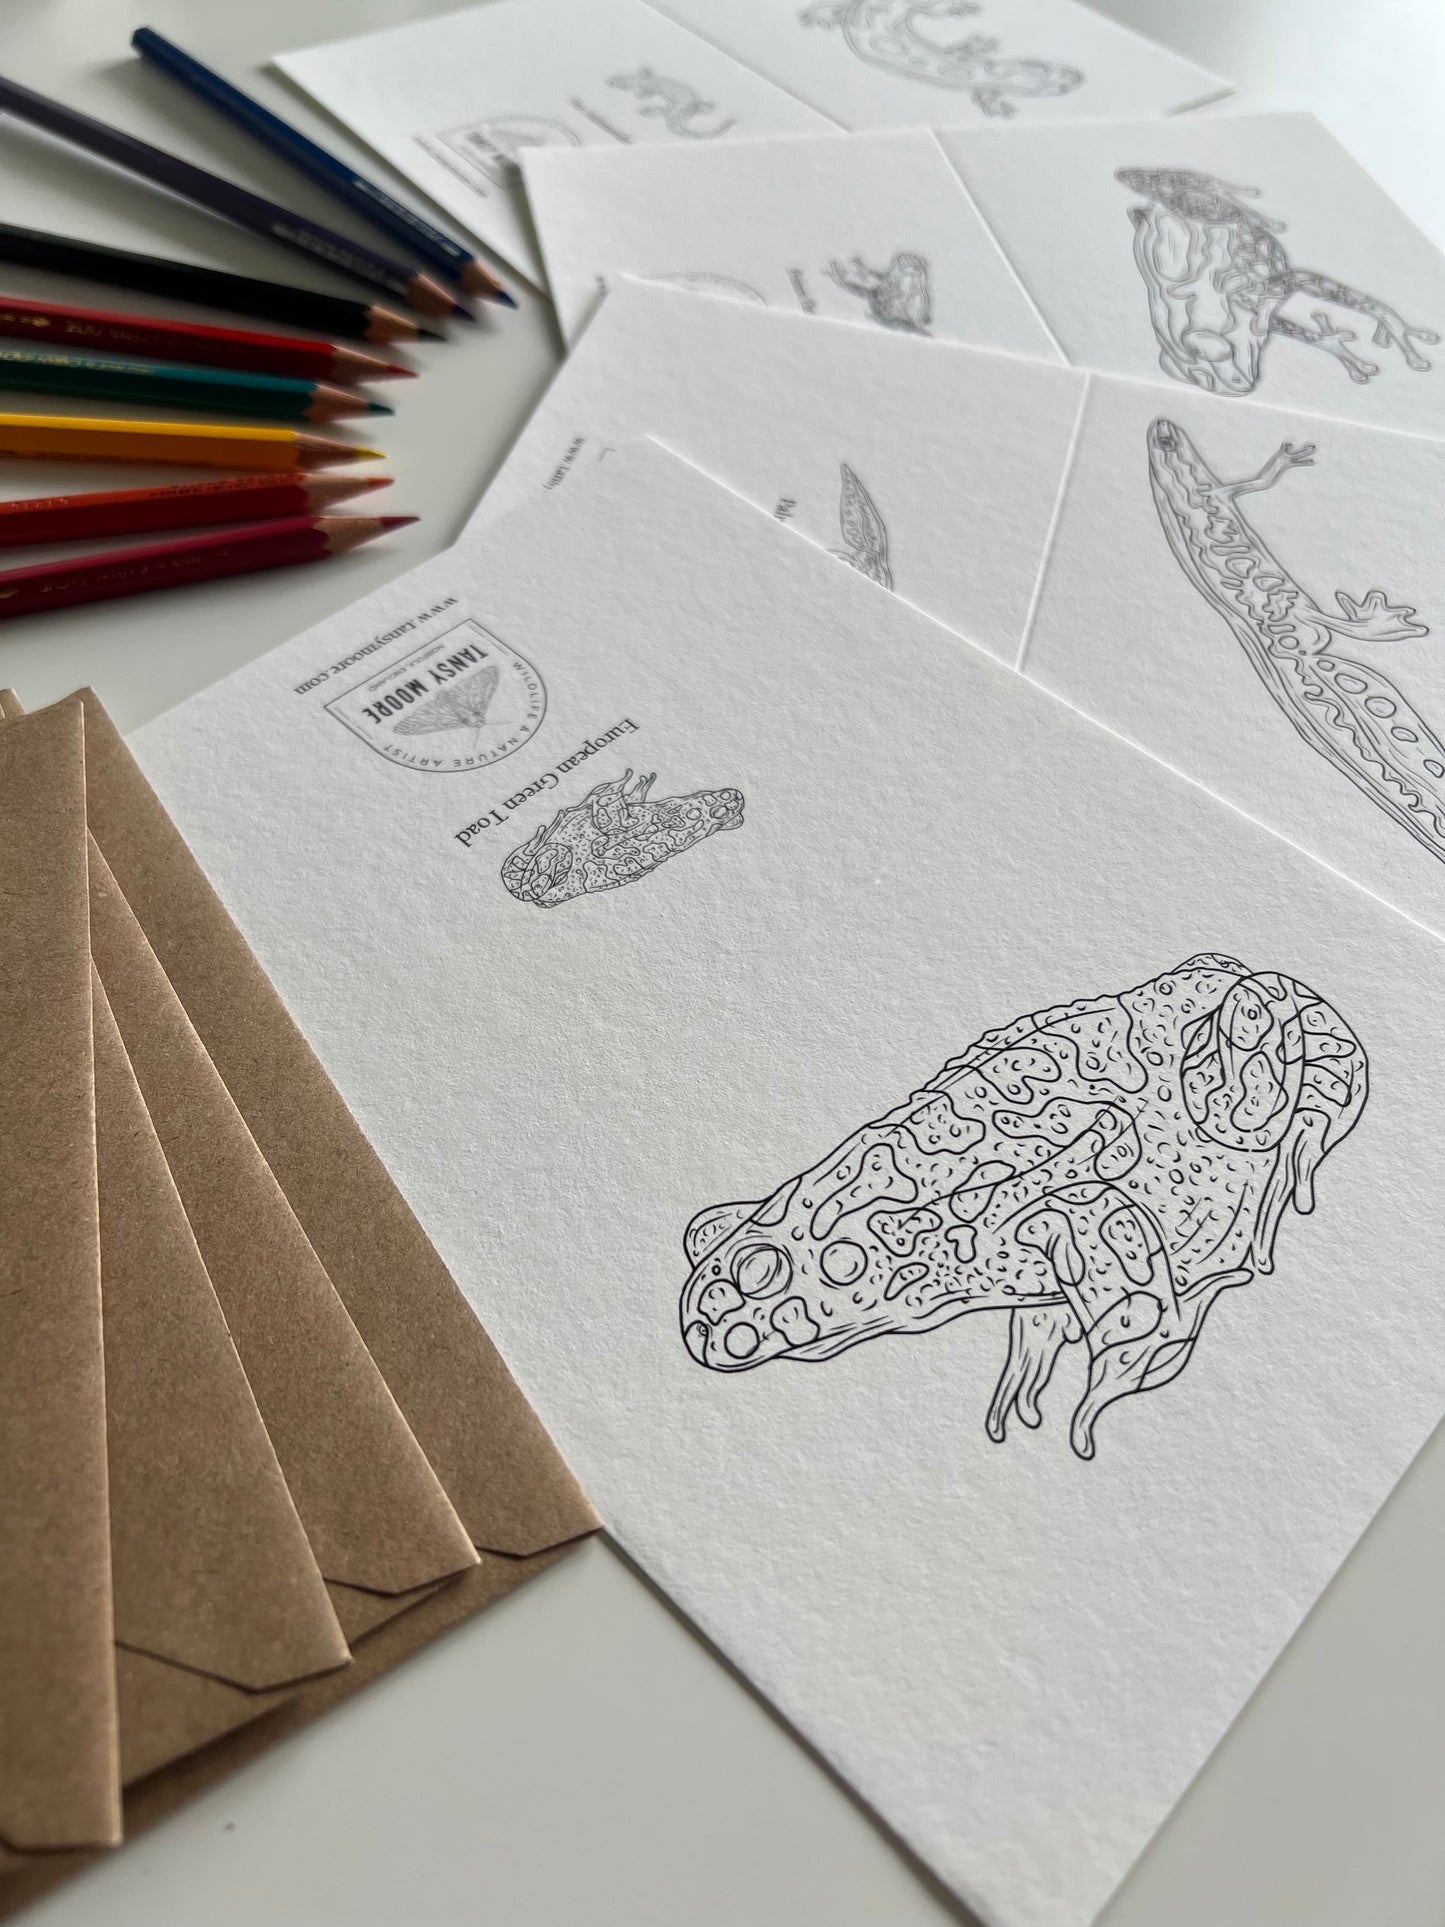 Amphibian Colouring in Card Set